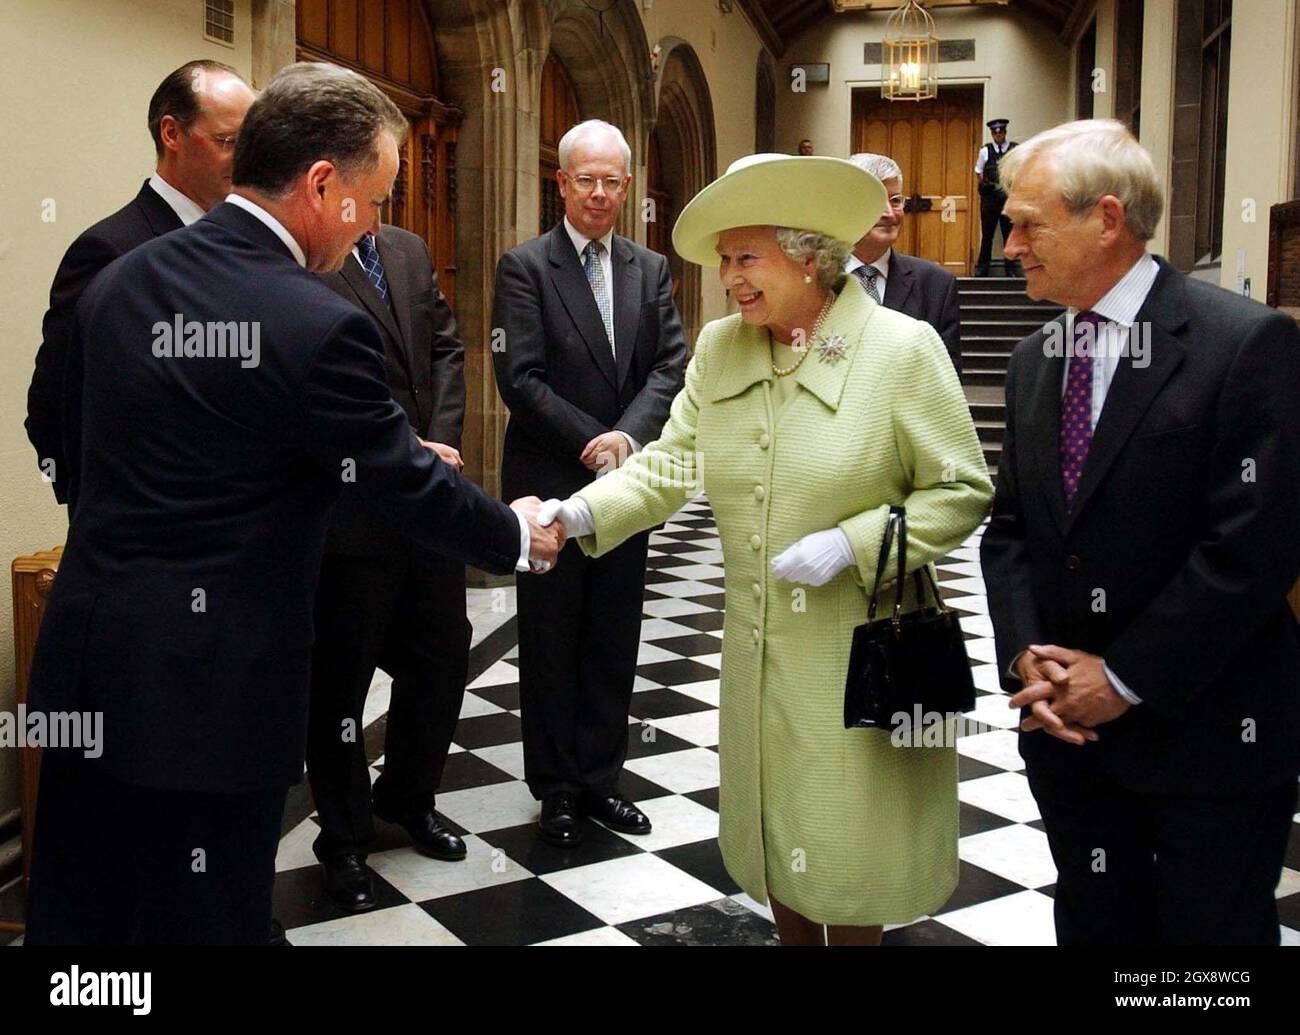 The Queen accompanied by the Presiding Officer George Reid (right) shakes hands with Scottish First Minister Jack McConnell at the Scottish Parliament in Edinburgh, where she was meeting party leaders. 3/4 length, hat, Royals  Stock Photo